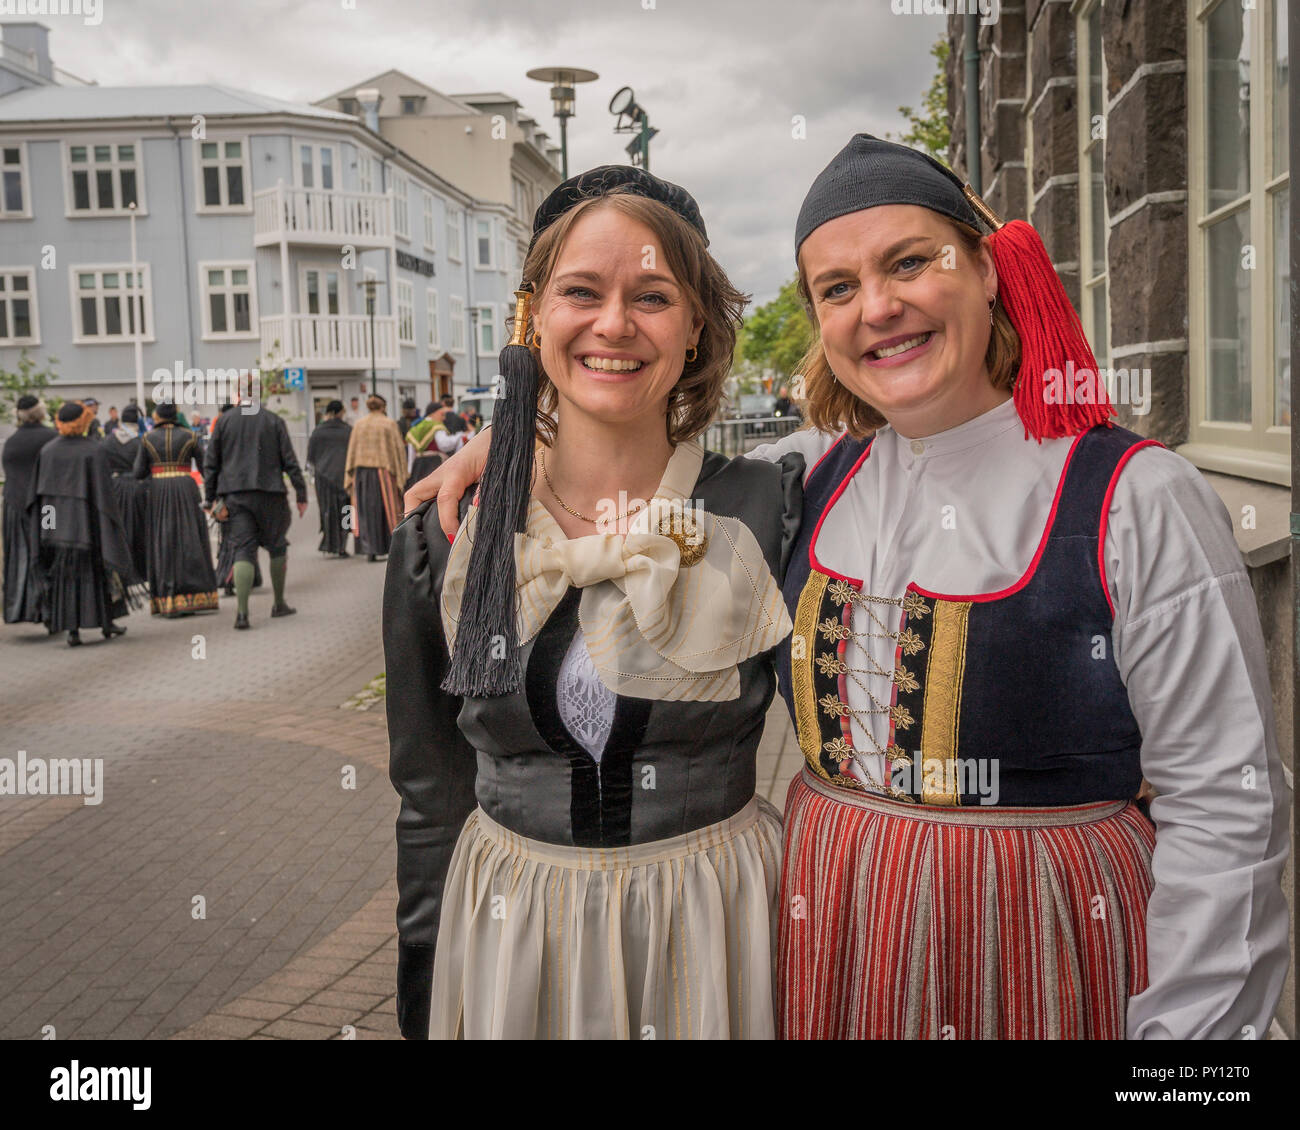 Women dressed in Iceland's national costume independence day, June 17th, Reykjavik, Iceland. Stock Photo